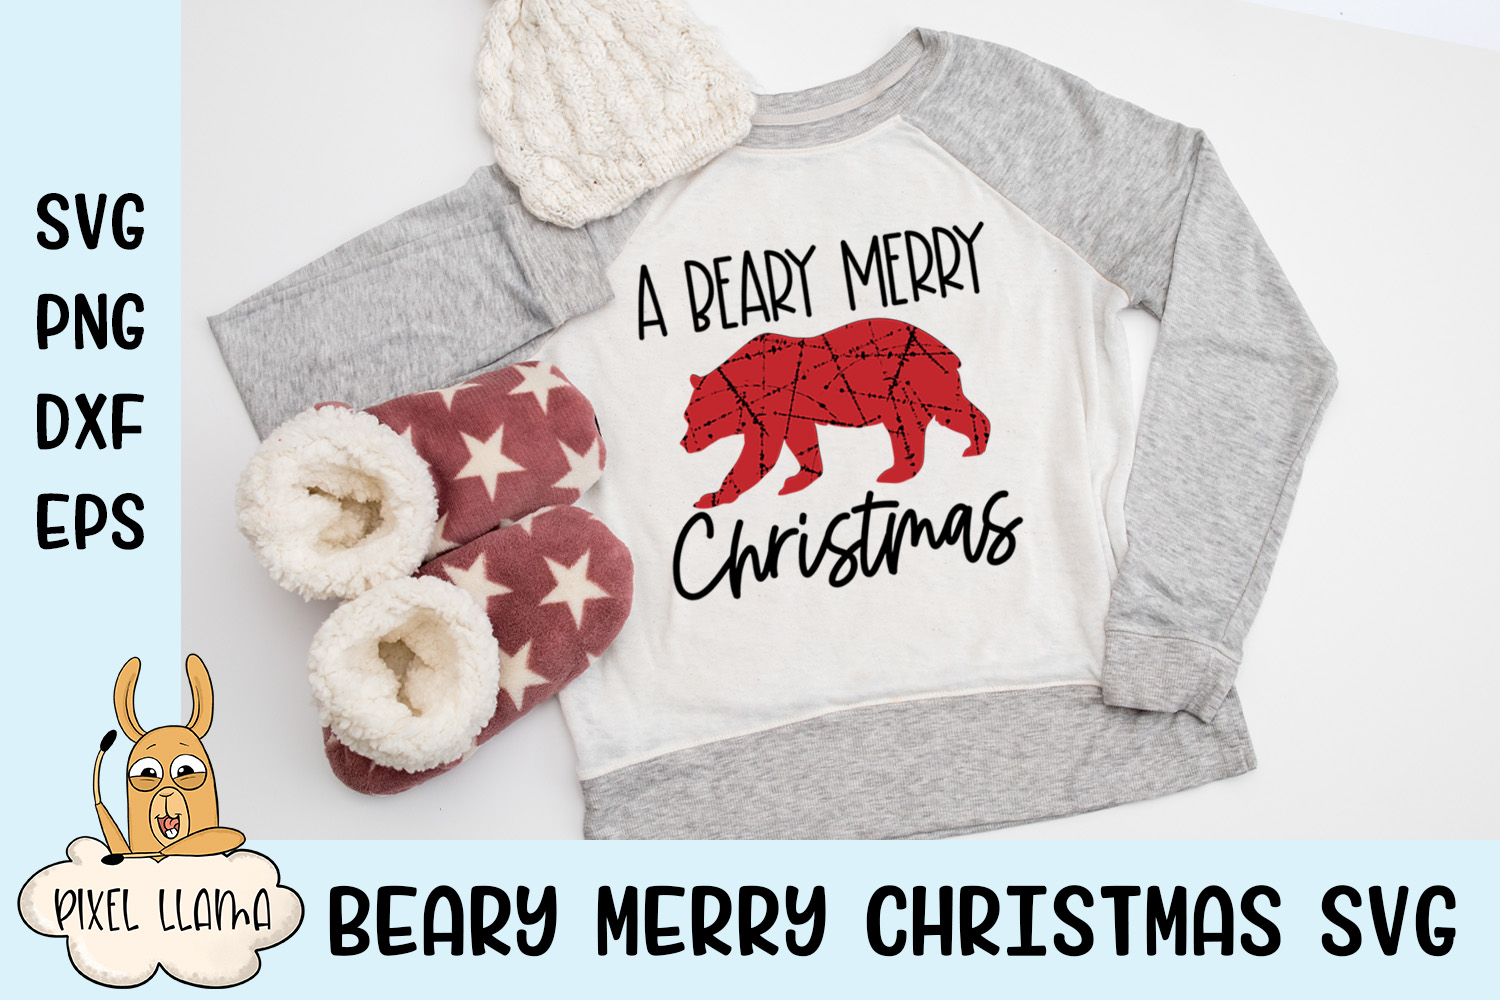 Download A Beary Merry Christmas Pillow Grunge SVG